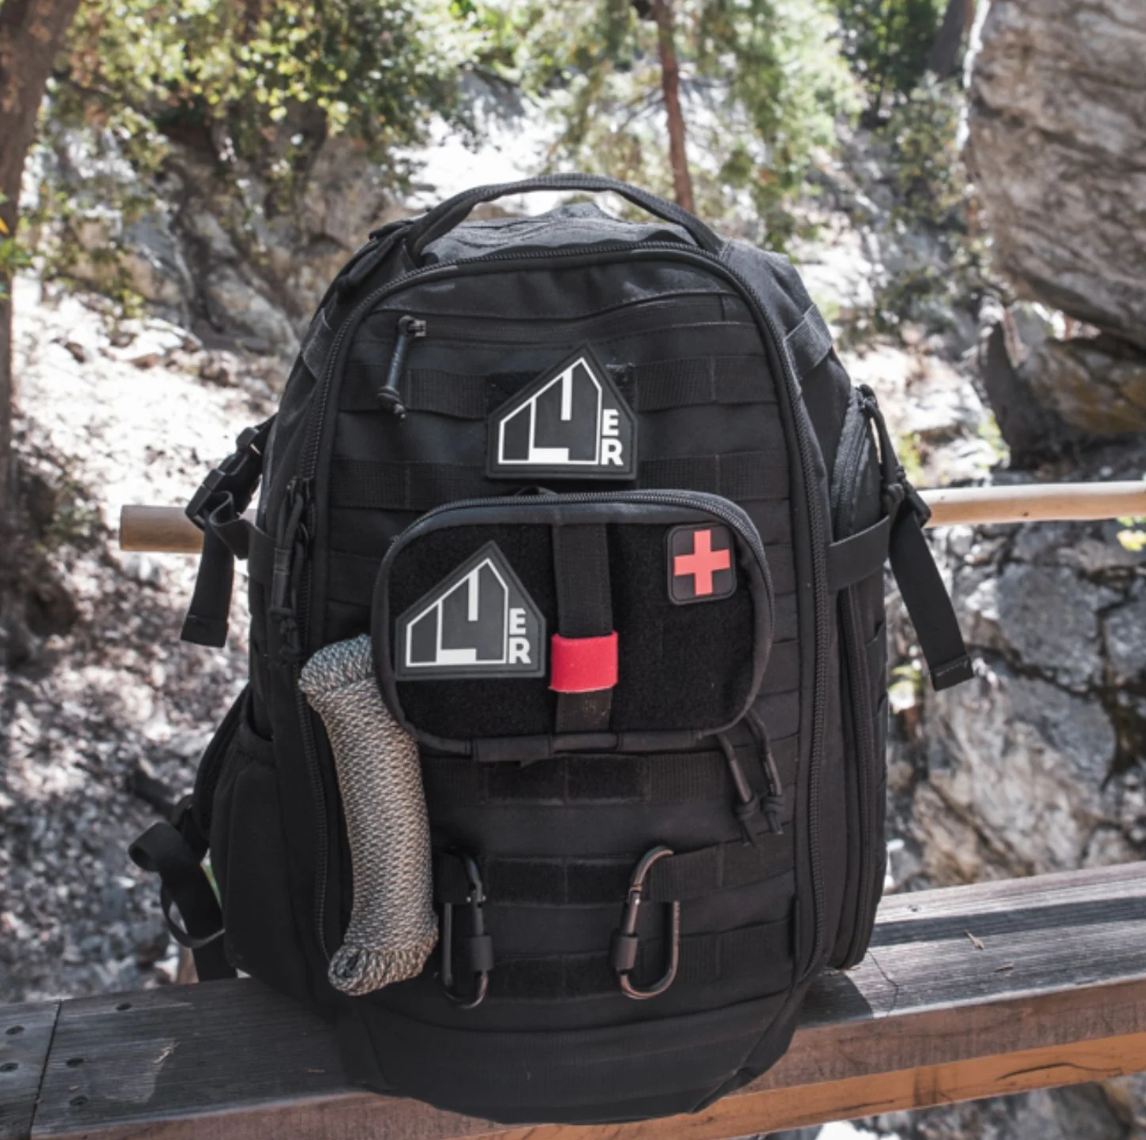 How to Pack Your 14er Tactical Bag for a Weeklong Adventure